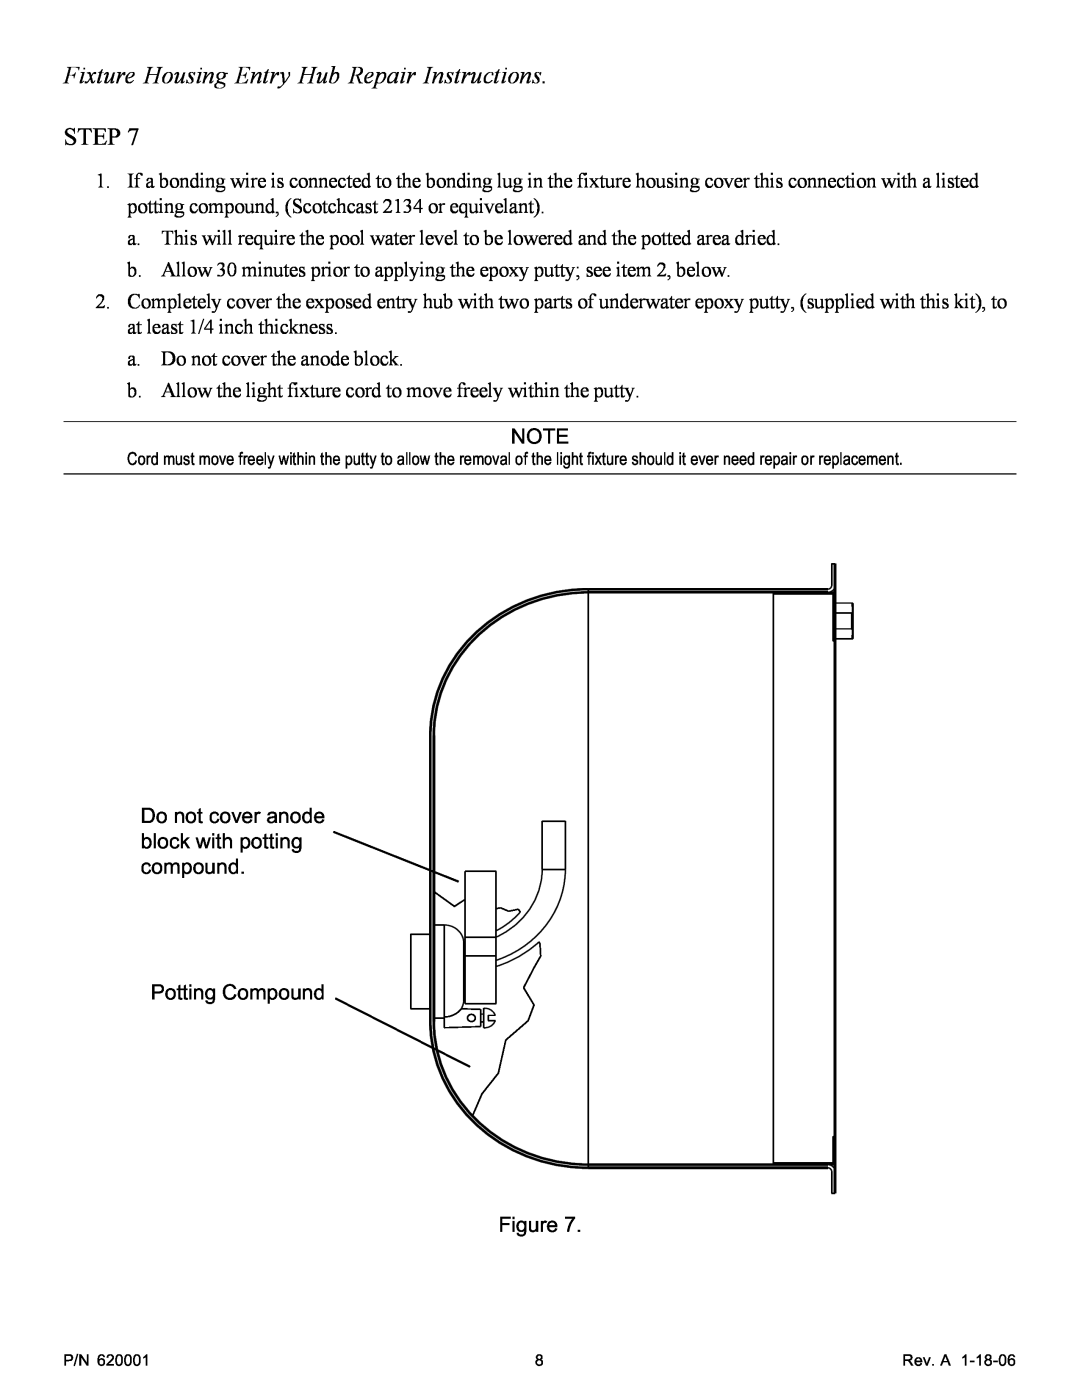 Pentair 620001 important safety instructions Fixture Housing Entry Hub Repair Instructions, Step 